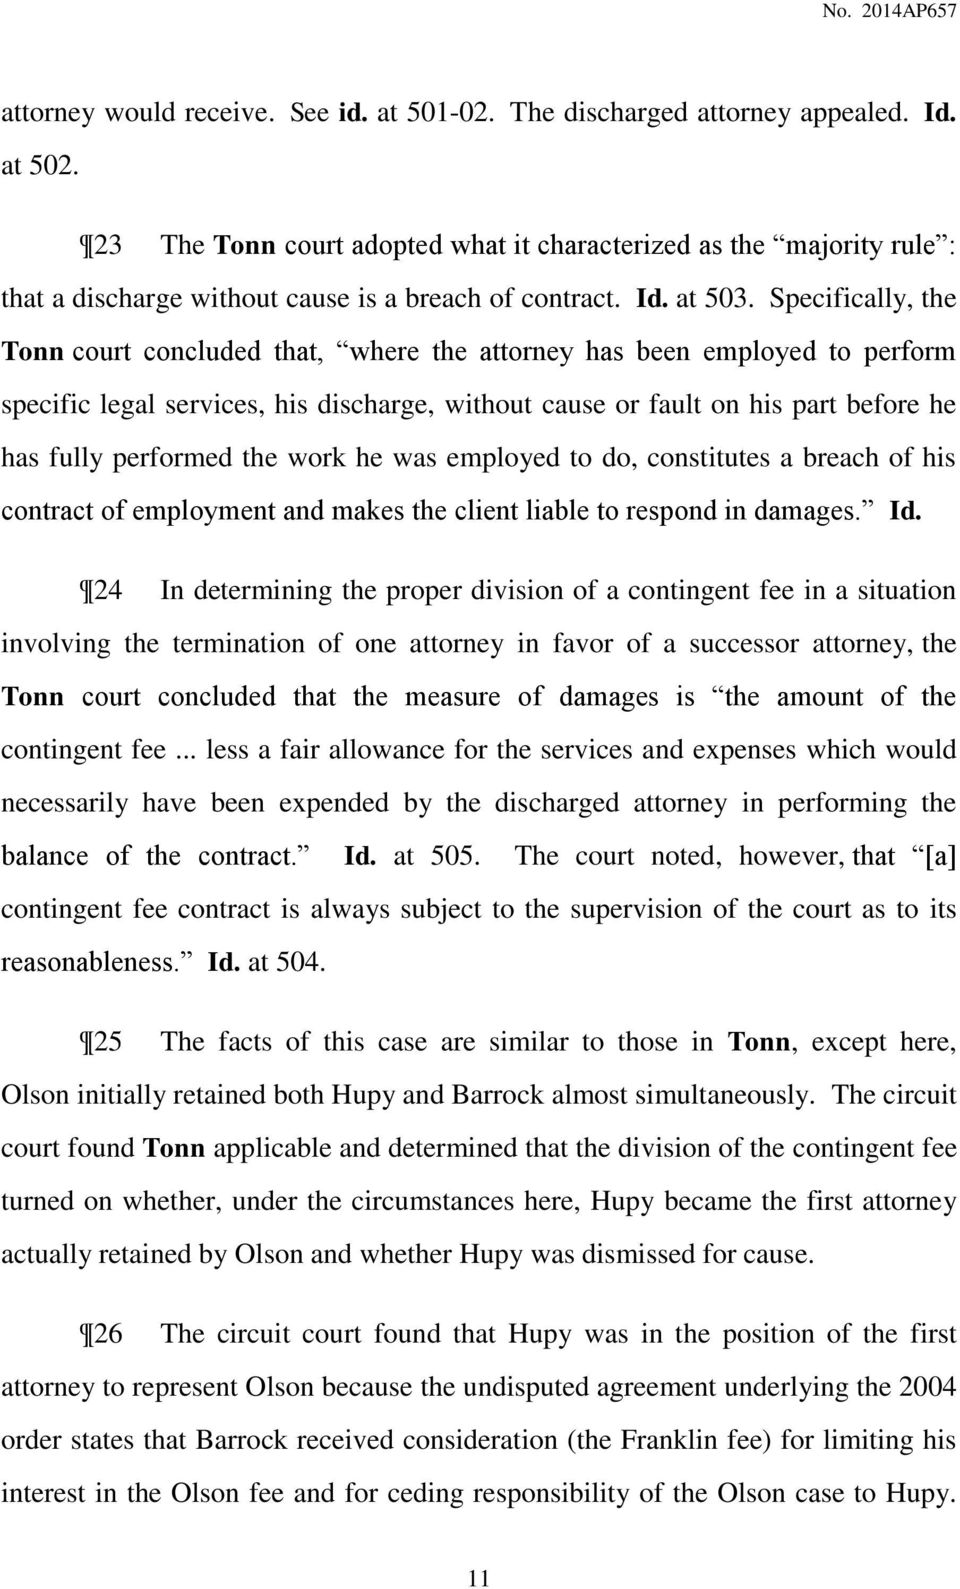 Specifically, the Tonn court concluded that, where the attorney has been employed to perform specific legal services, his discharge, without cause or fault on his part before he has fully performed